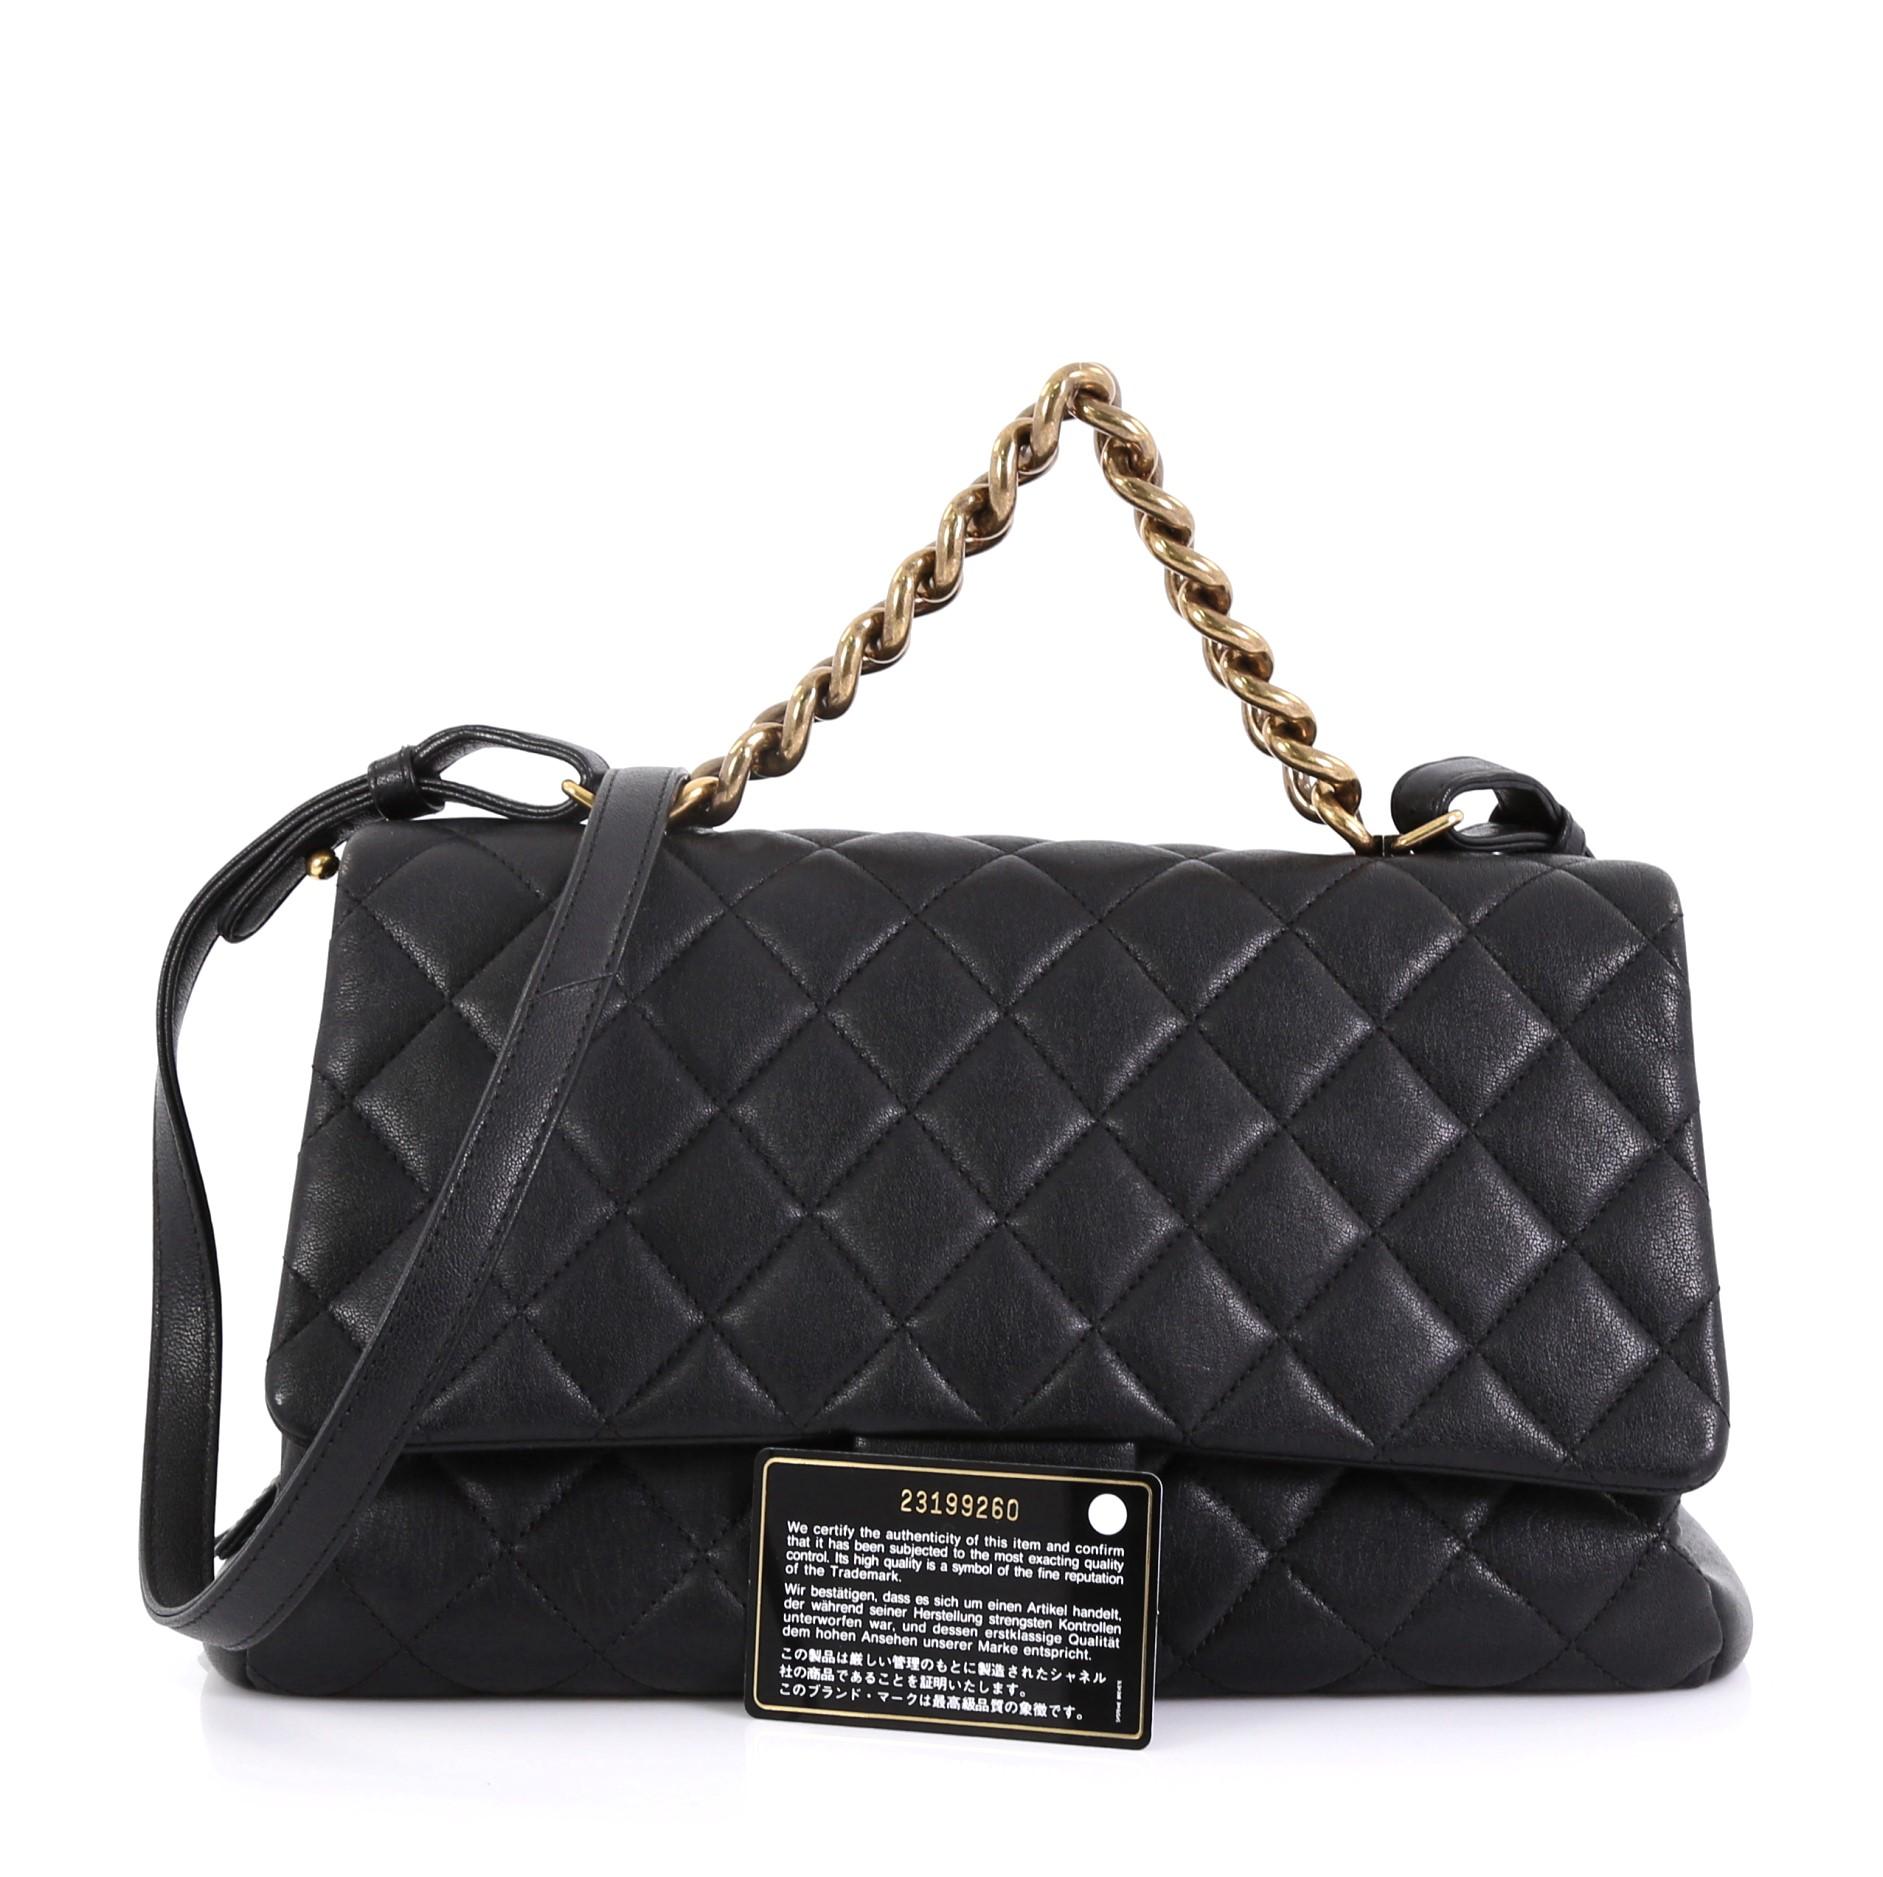 This Chanel Trapezio Flap Bag Quilted Sheepskin Large, crafted in black quilted sheepskin, features chain link strap with leather pad, exterior back slip pocket, protective base studs, and aged gold-tone hardware. Its CC turn-lock closure opens to a